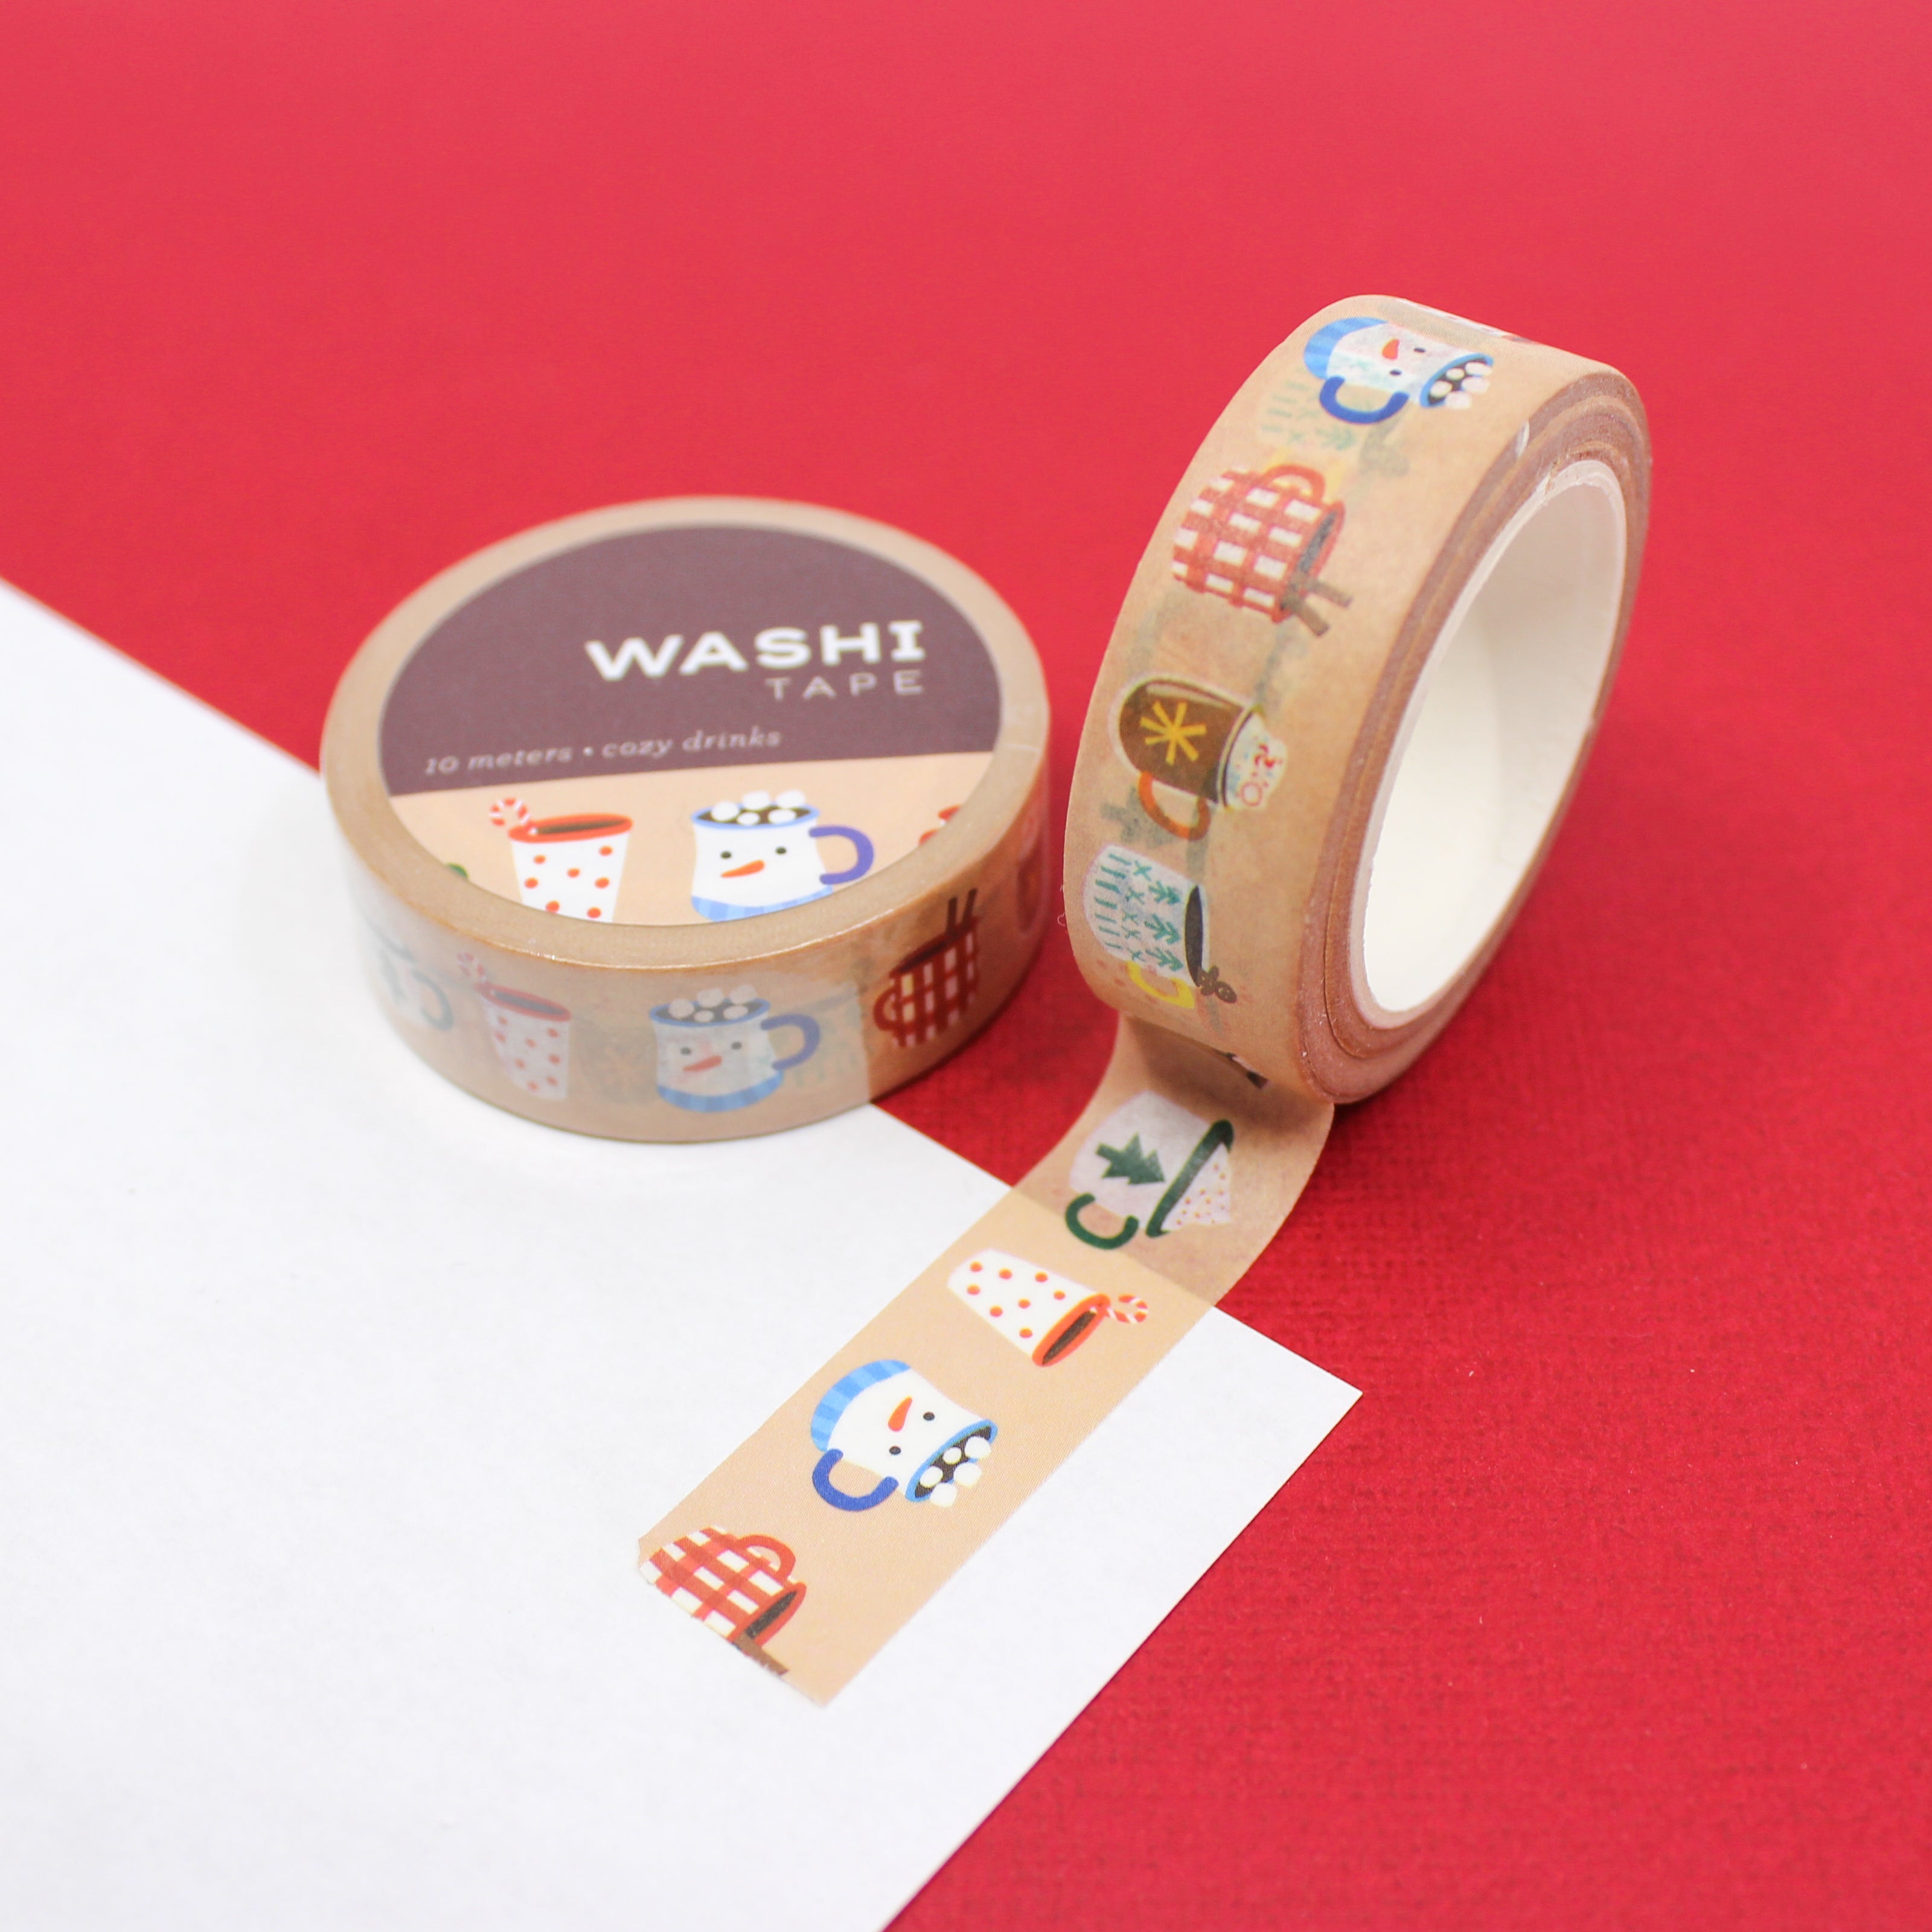 This is a colorful cozy winter drinks pumpkin spice latte pattern washi tape from BBB Supplies Craft Shop